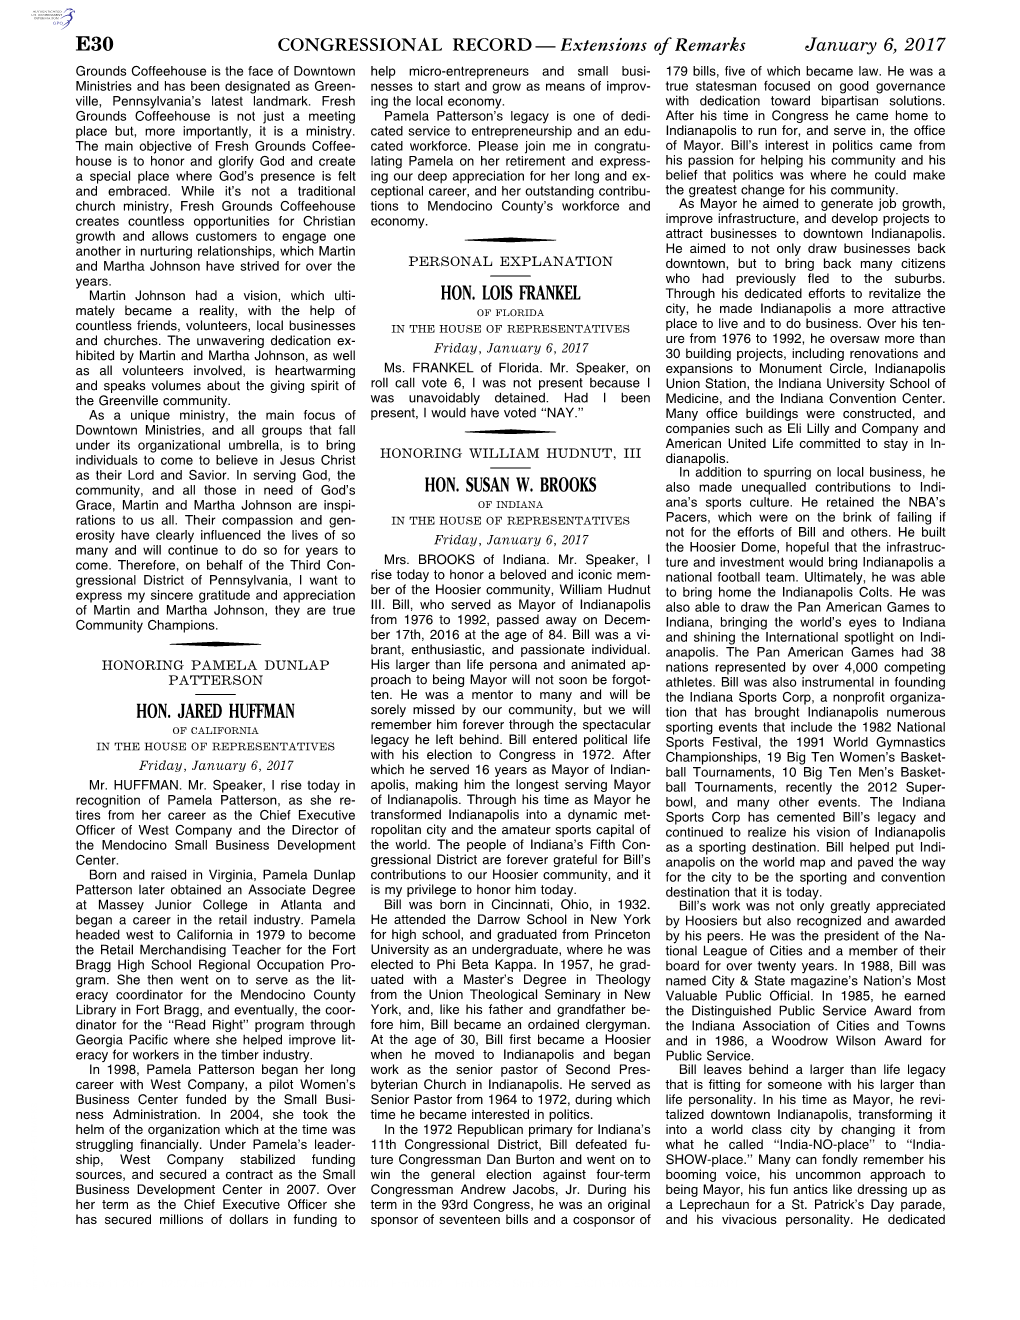 CONGRESSIONAL RECORD— Extensions of Remarks E30 HON. JARED HUFFMAN HON. LOIS FRANKEL HON. SUSAN W. BROOKS